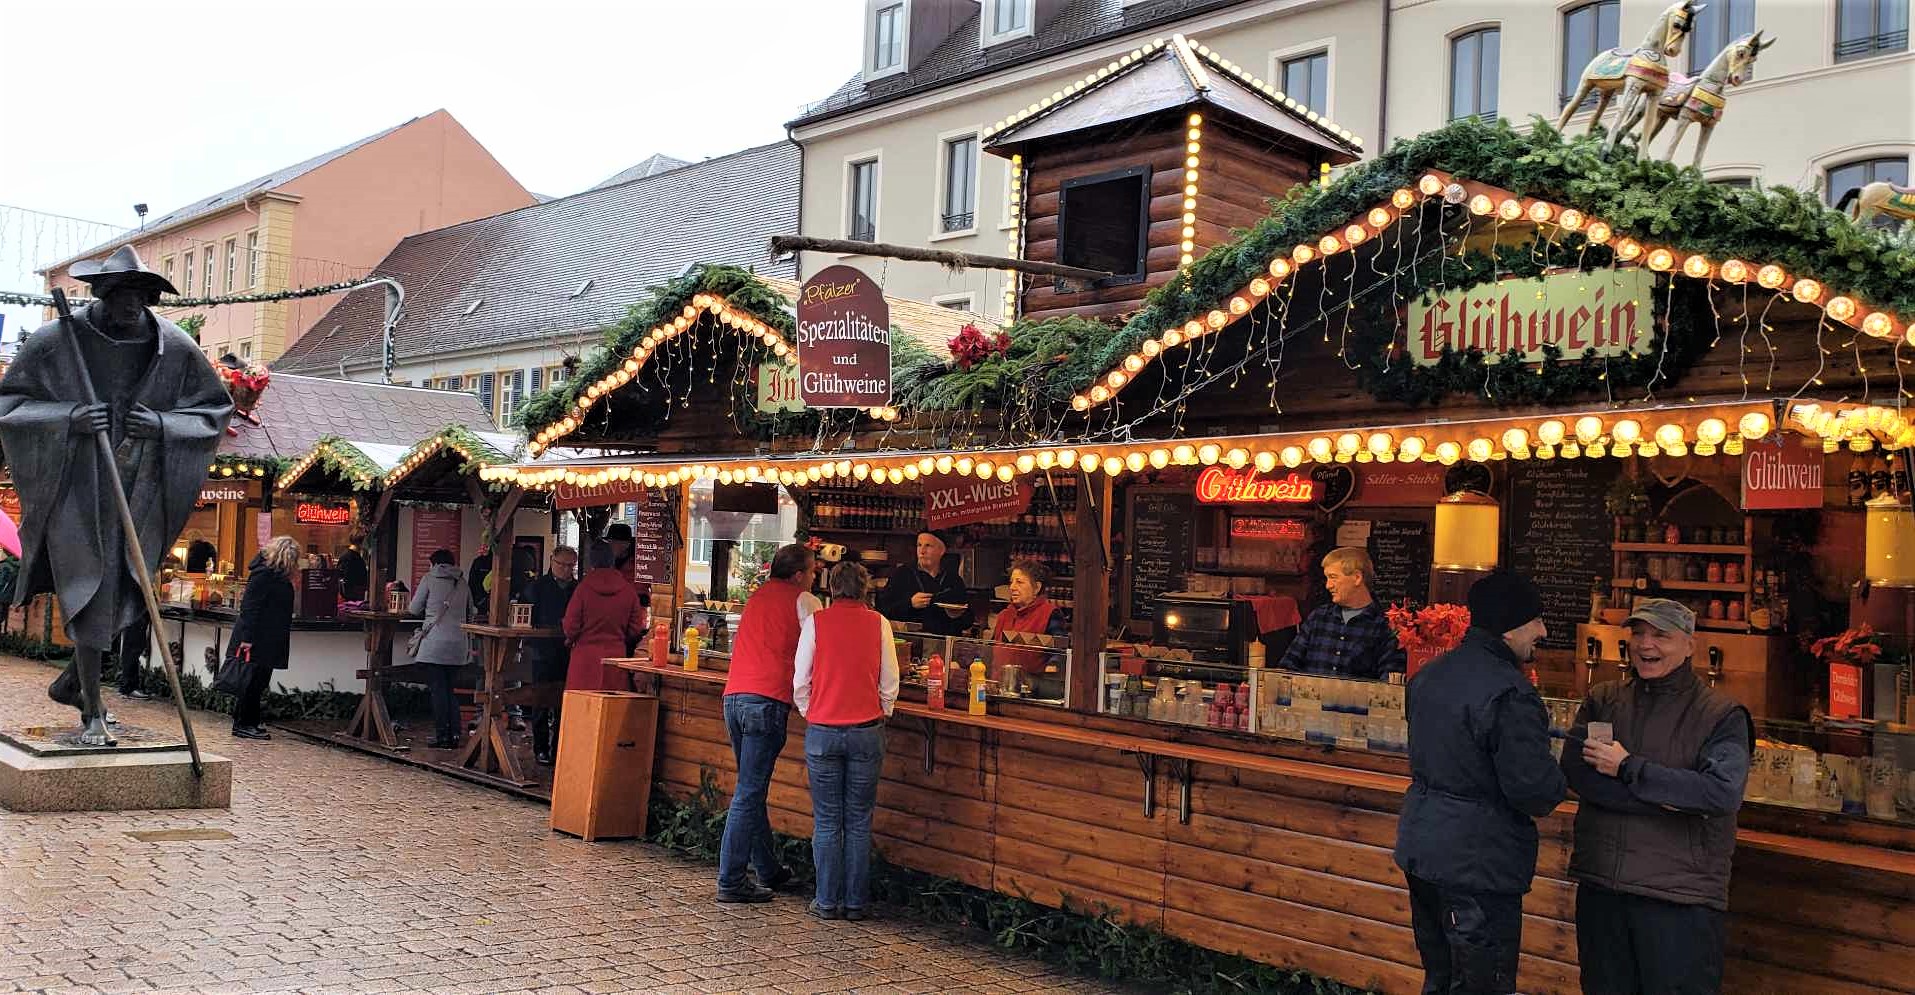 Christmas Market in Speyer, Germany. Photo by Susan J. Young.